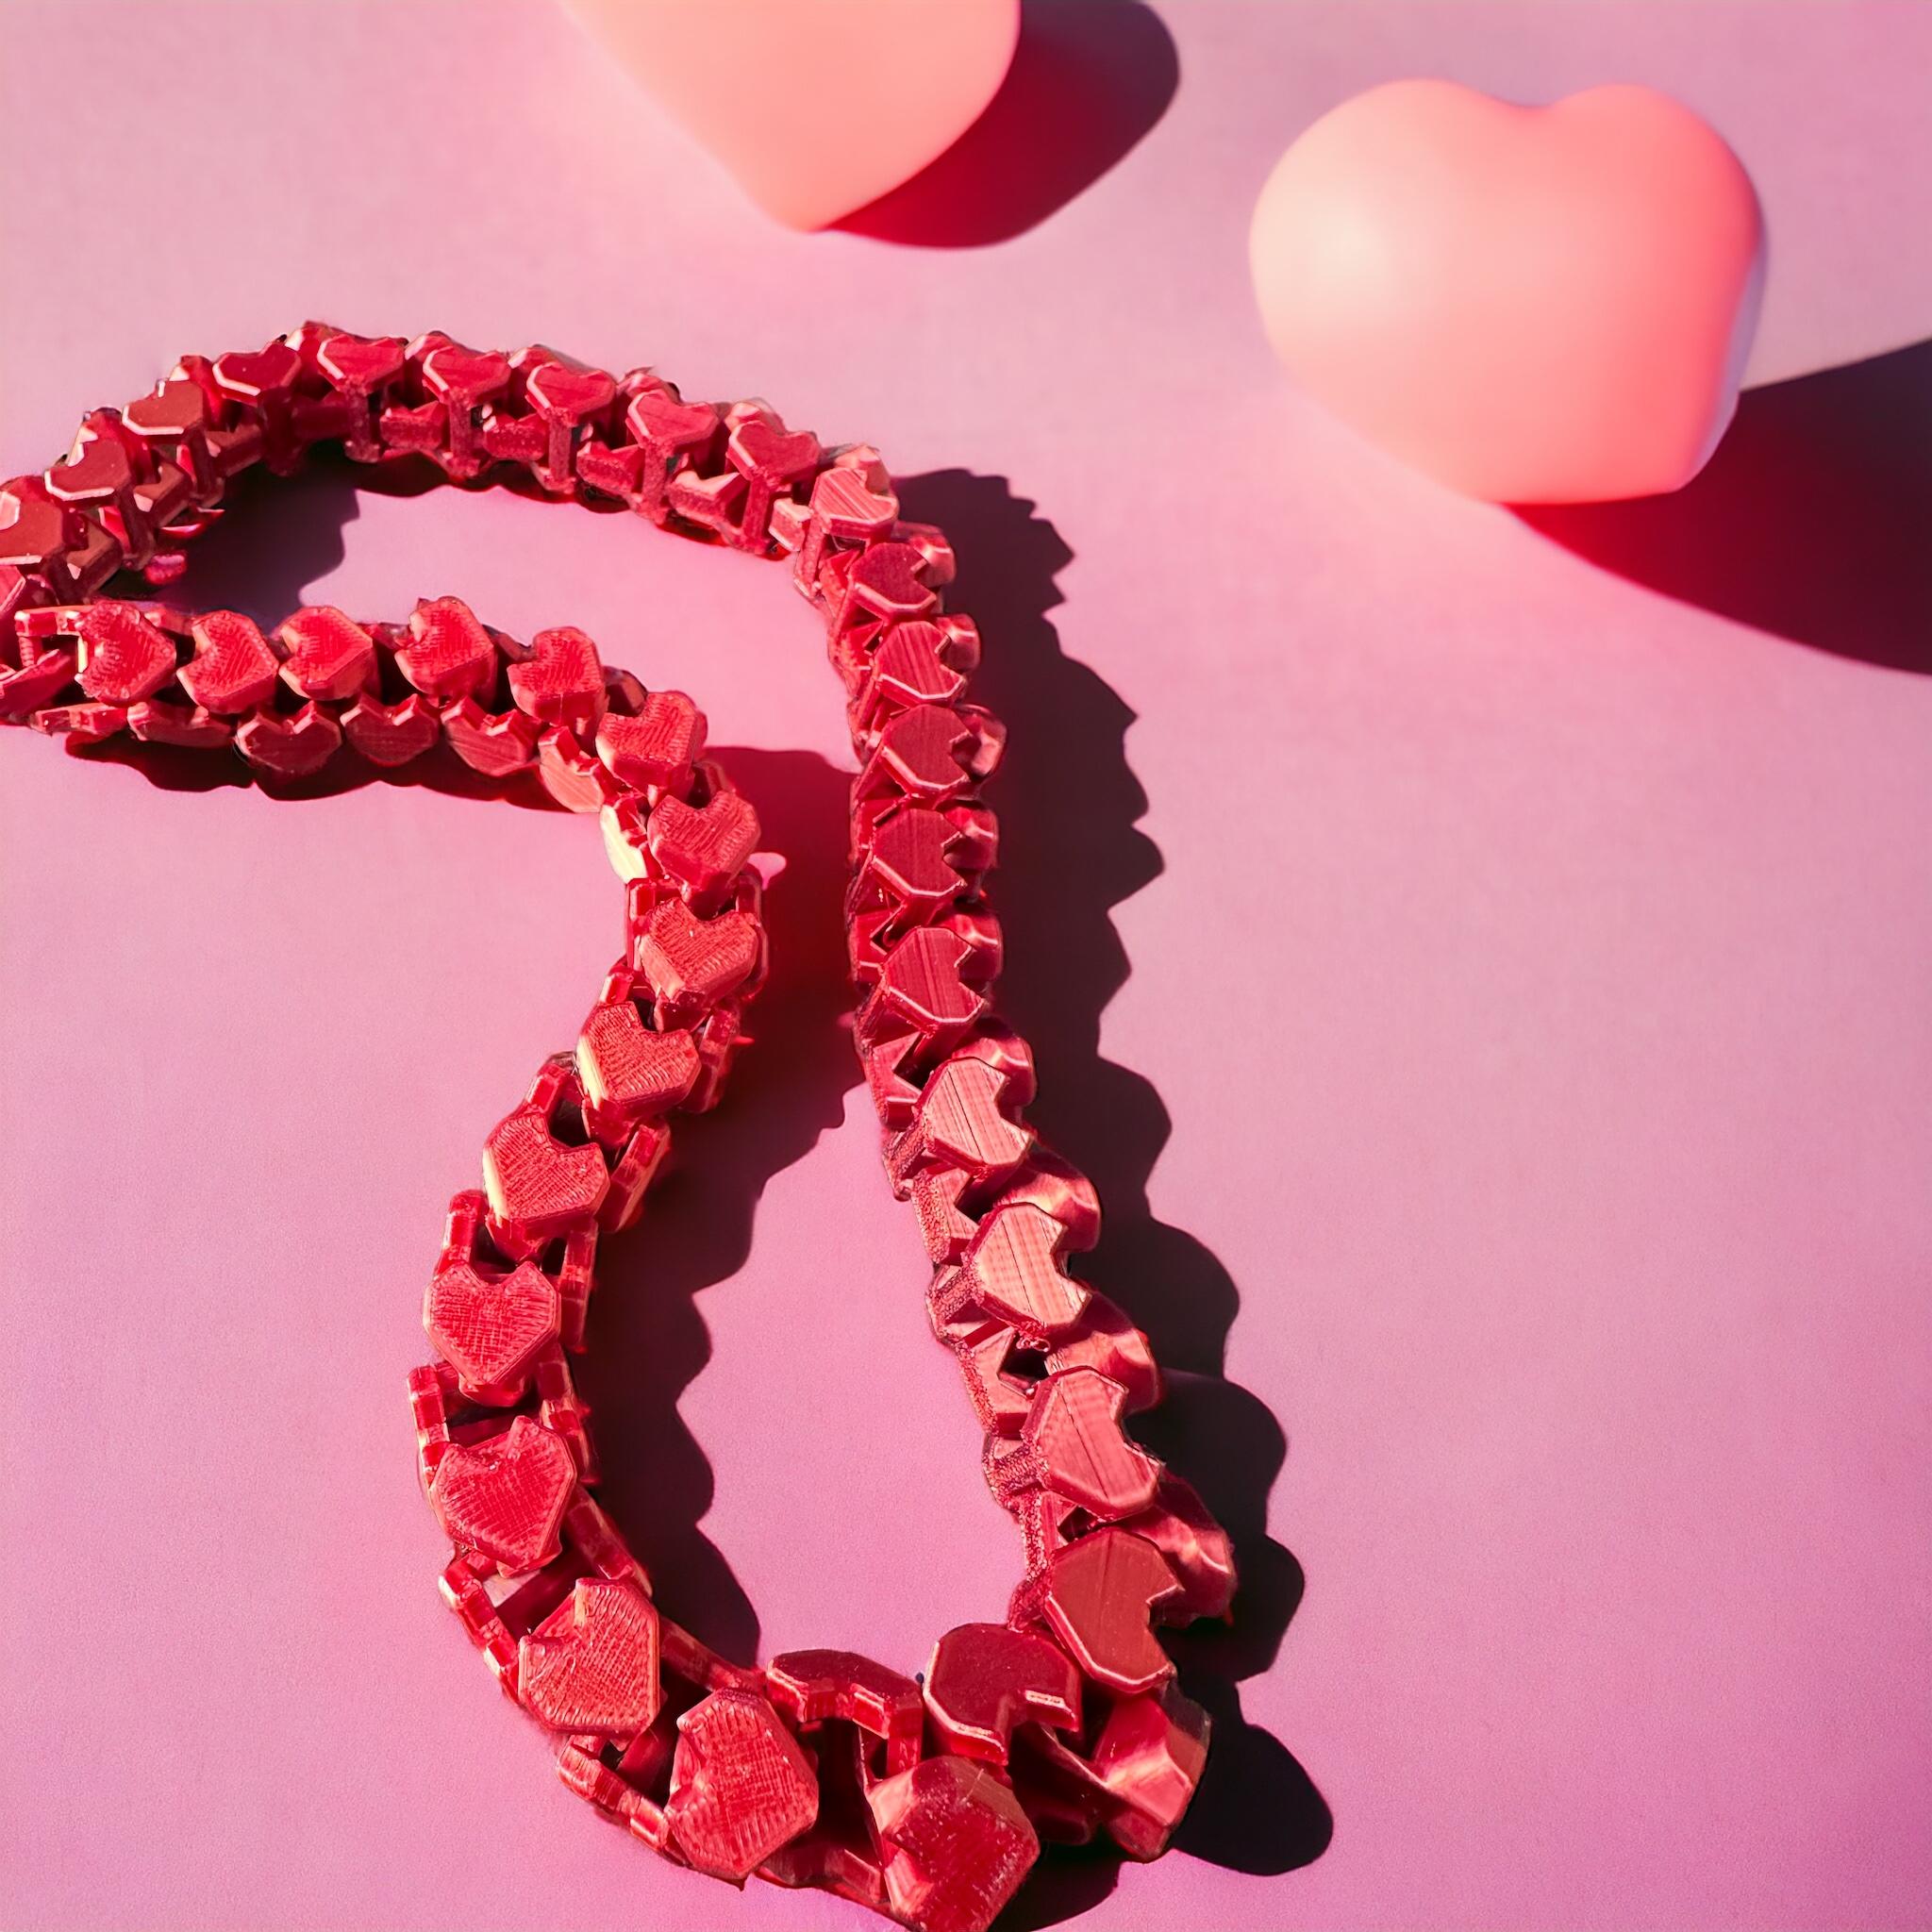 Zelda Energy, Hearts Print in Place, Articulate, ROSARY - VALENTINE'S DAY, FOR HER, FOR HIM 3d model